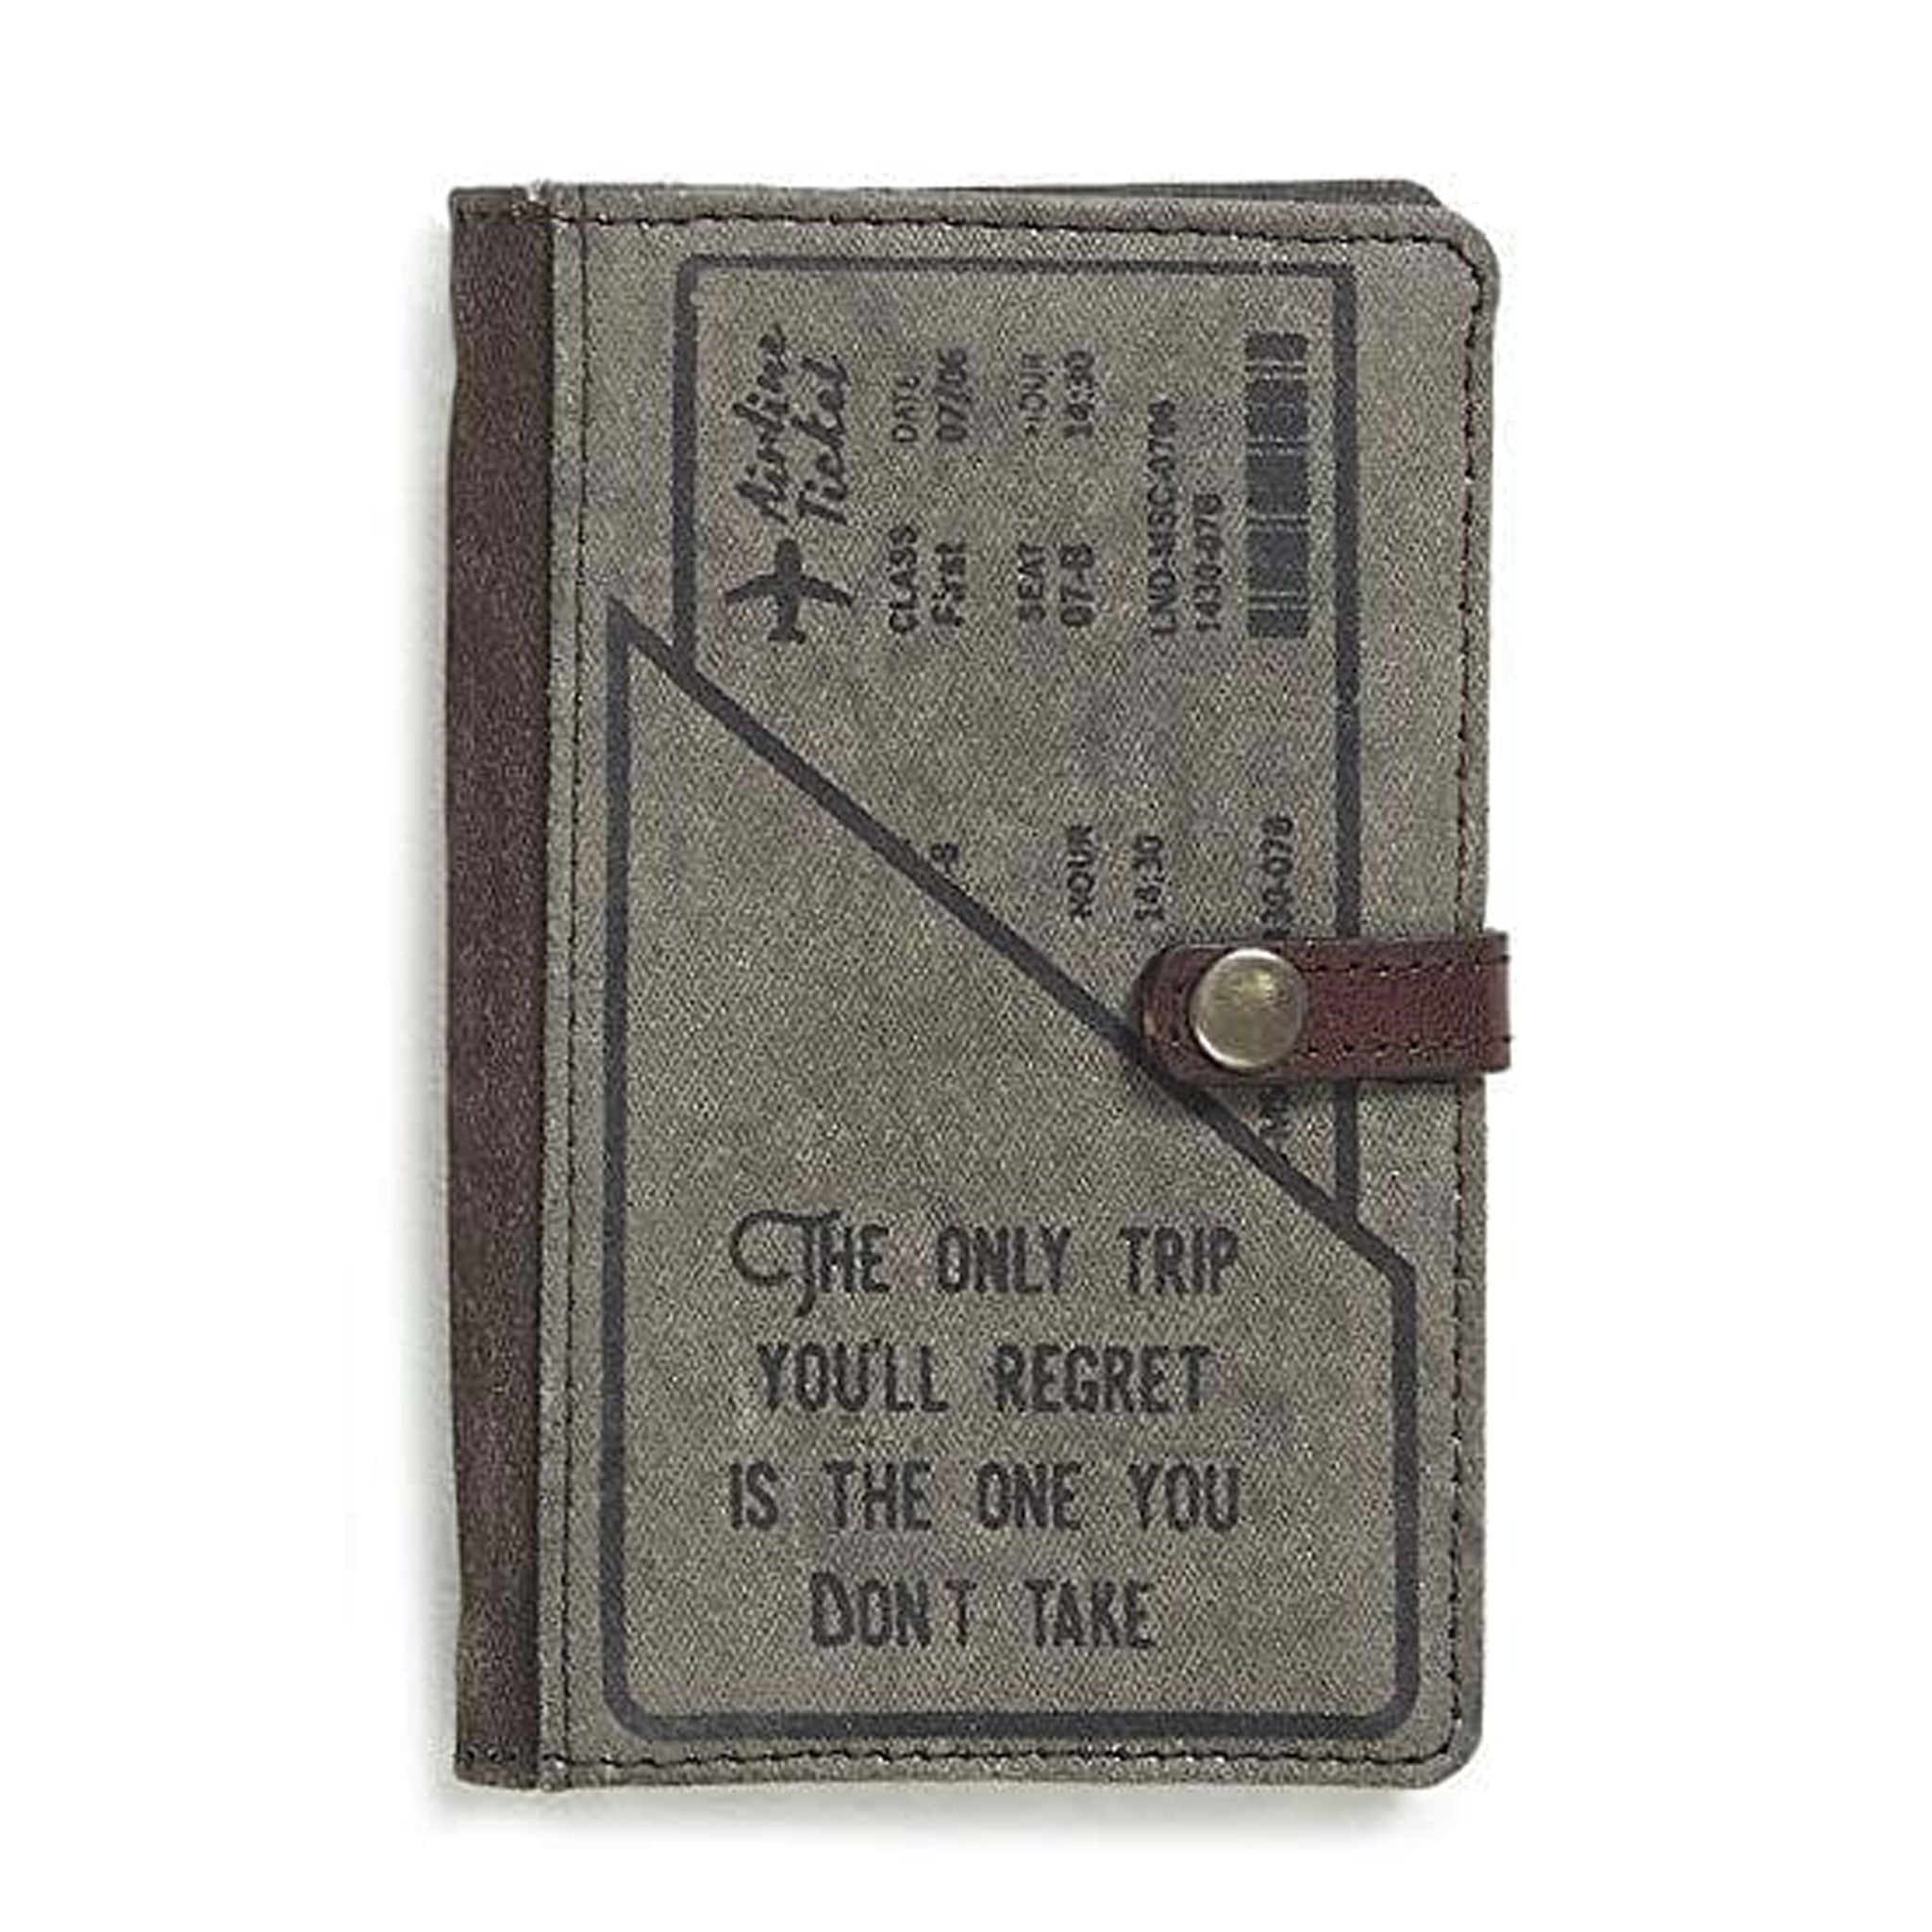 Mona-B Bag Mona B Pack of Travel Passport Holder Credit Card Wallet Case and Luggage Tag (2 Items) (Trip Regrets Passport Wallet and Luggage Tag)